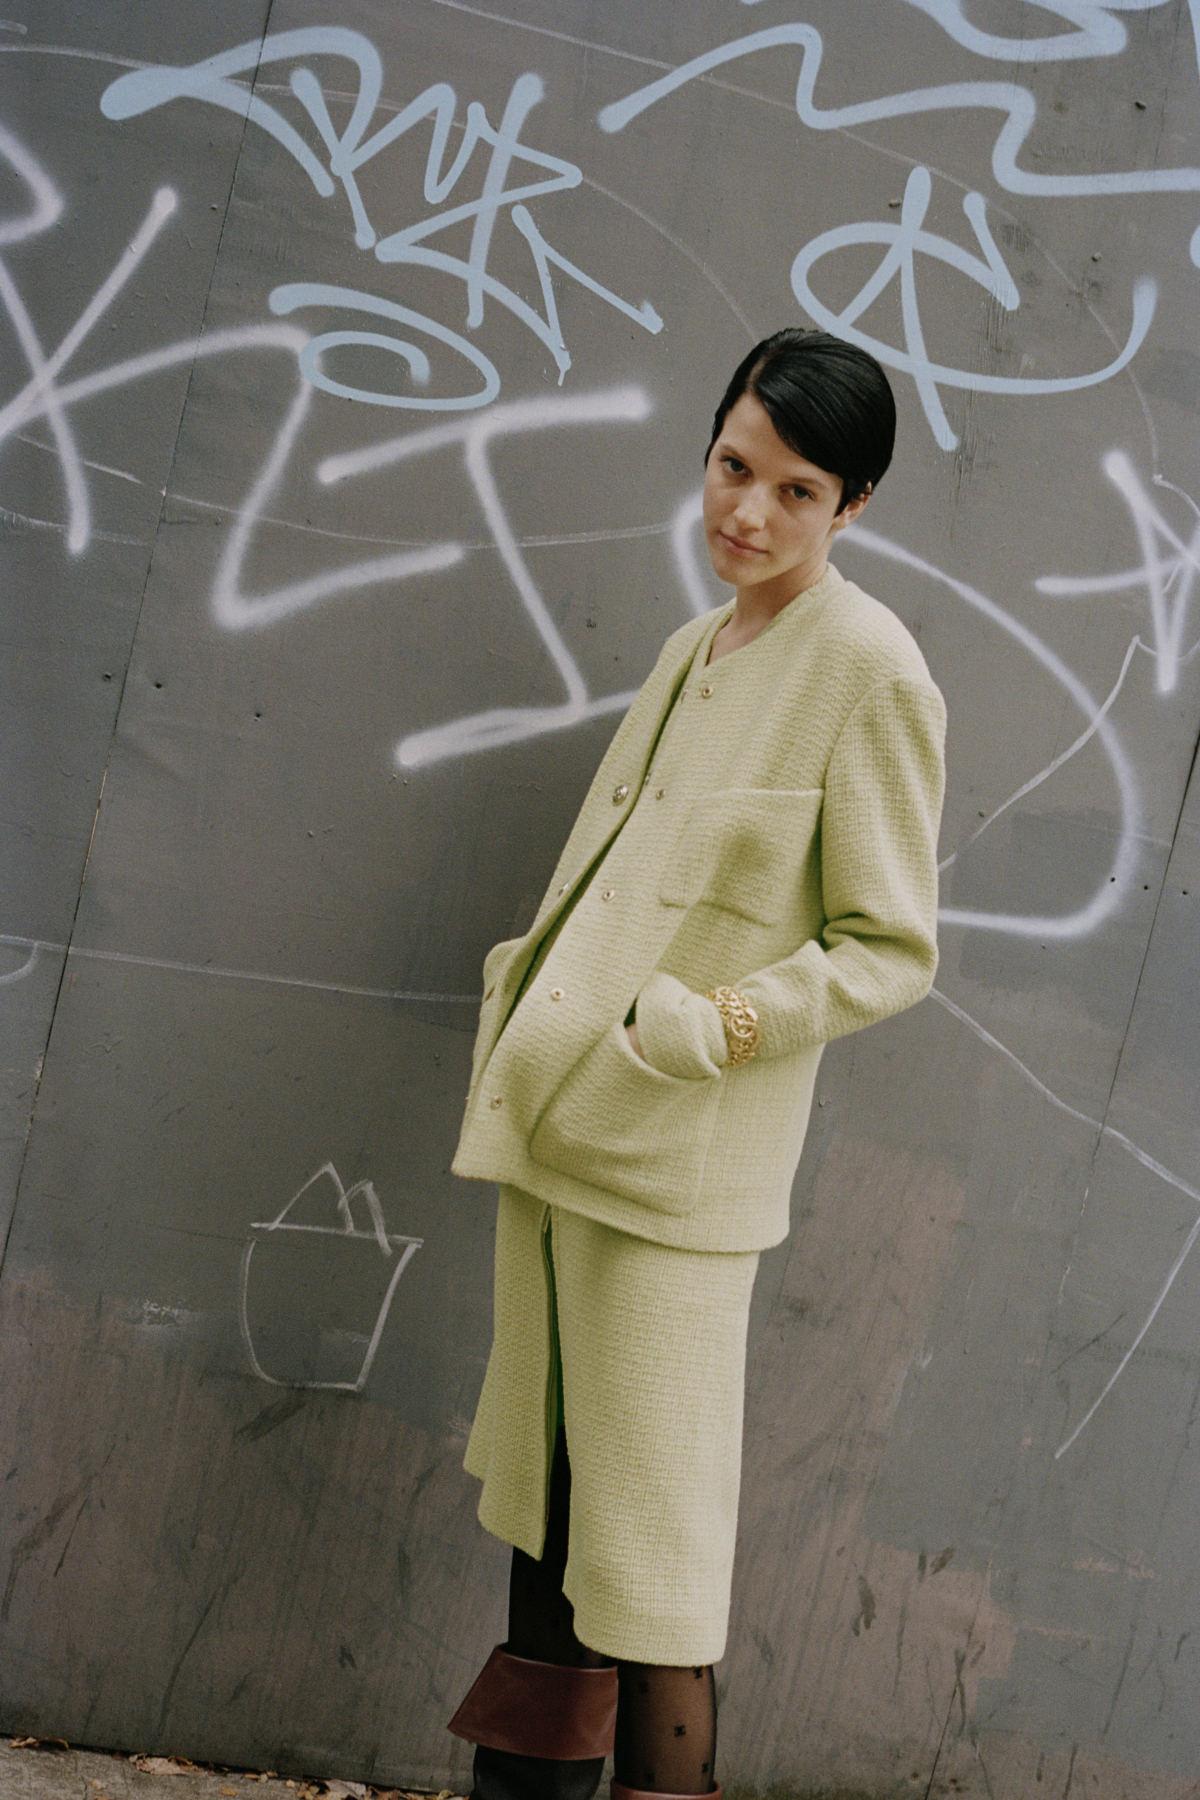 black haired model standing in front of graffiti in green chanel suit